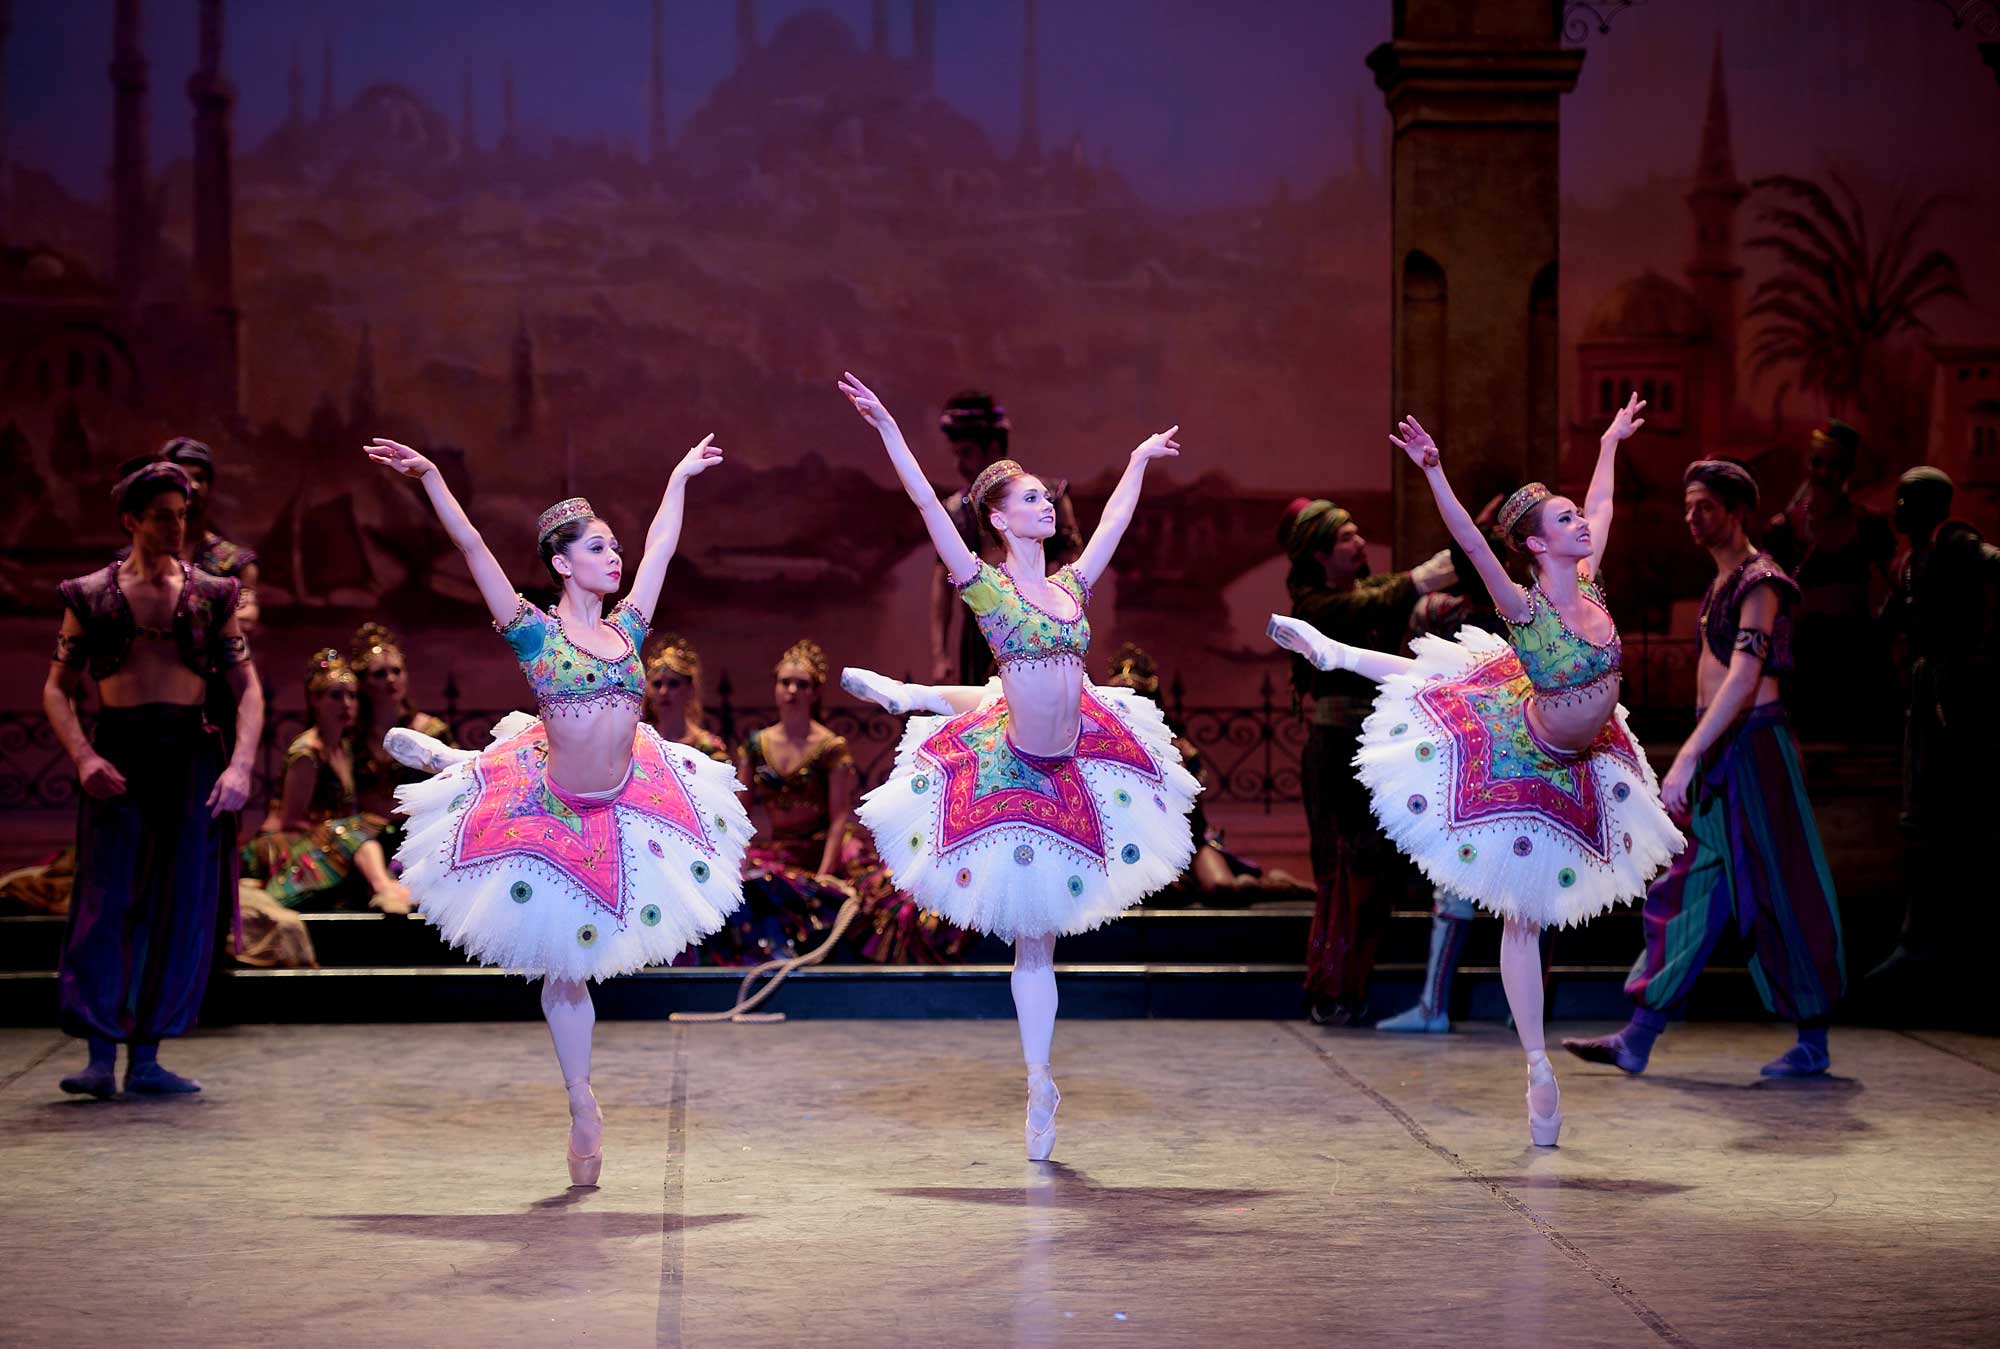 Crystal-Costa,-Alison-McWhinney,-and-Isabelle-Brouwers-in-Le-Corsaire-(c)-Laurent-Liotardo